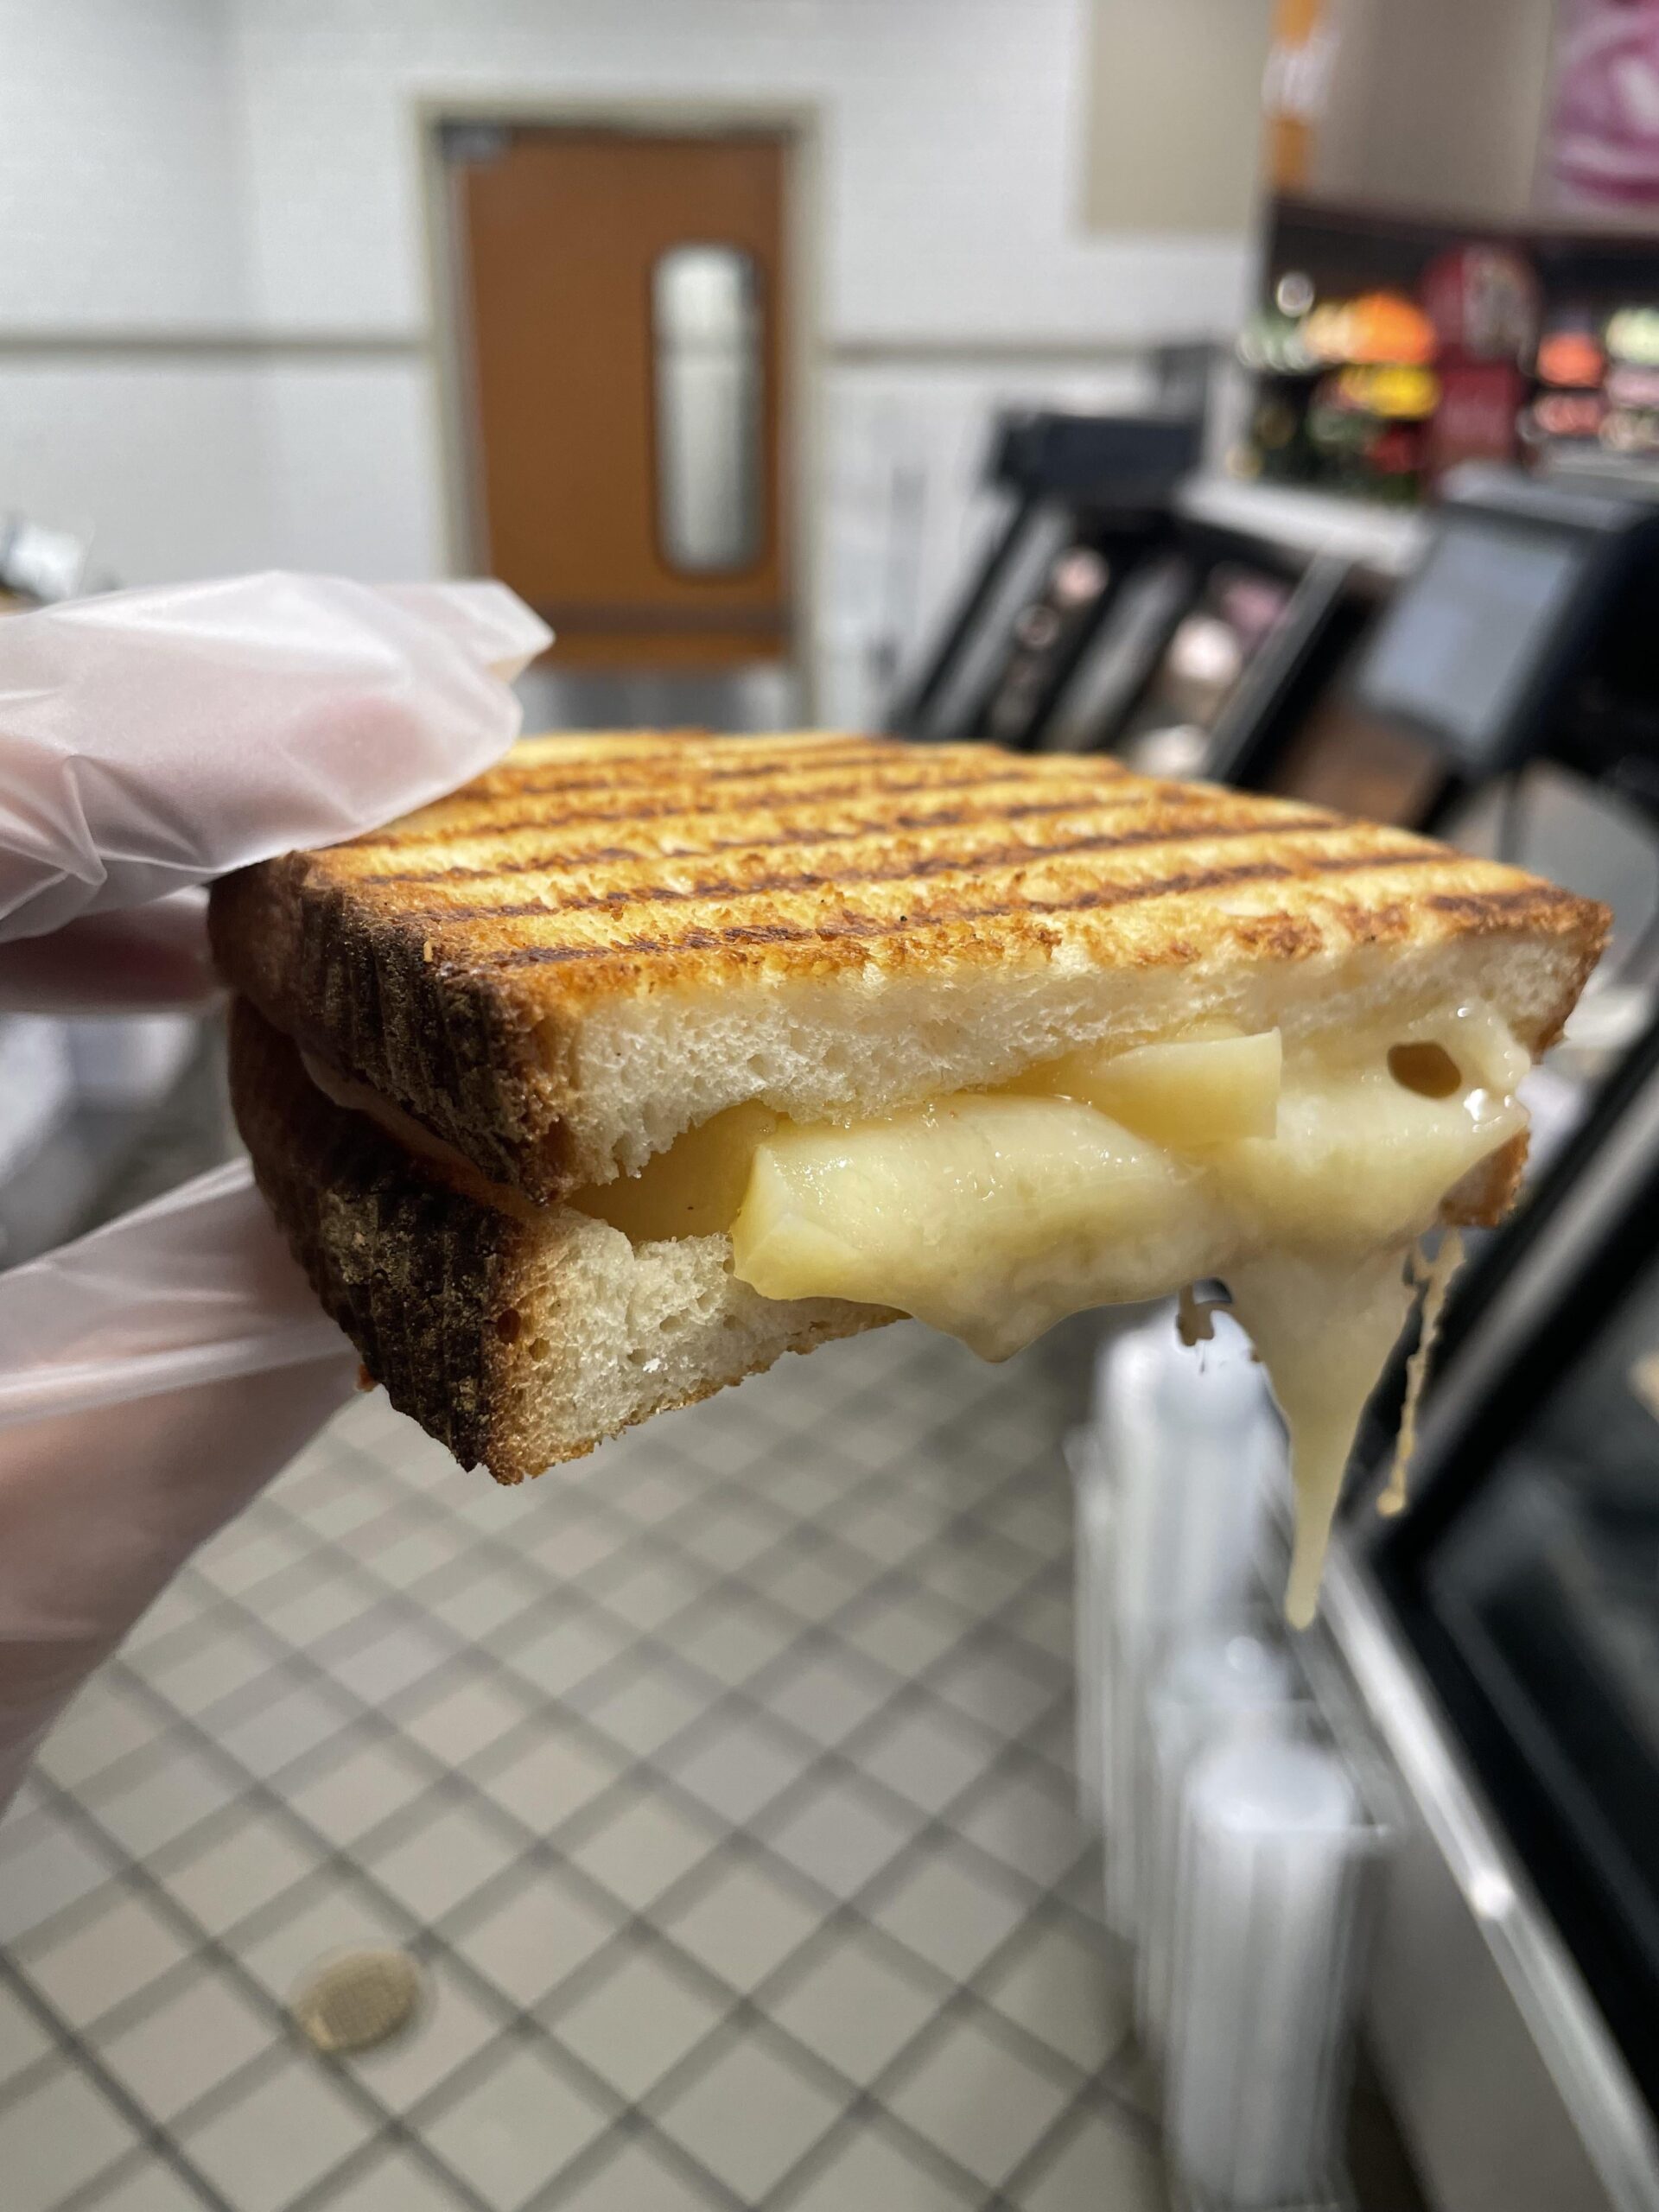 Day 241 of posting grilled cheese sandwiches until I run out of cheese ...